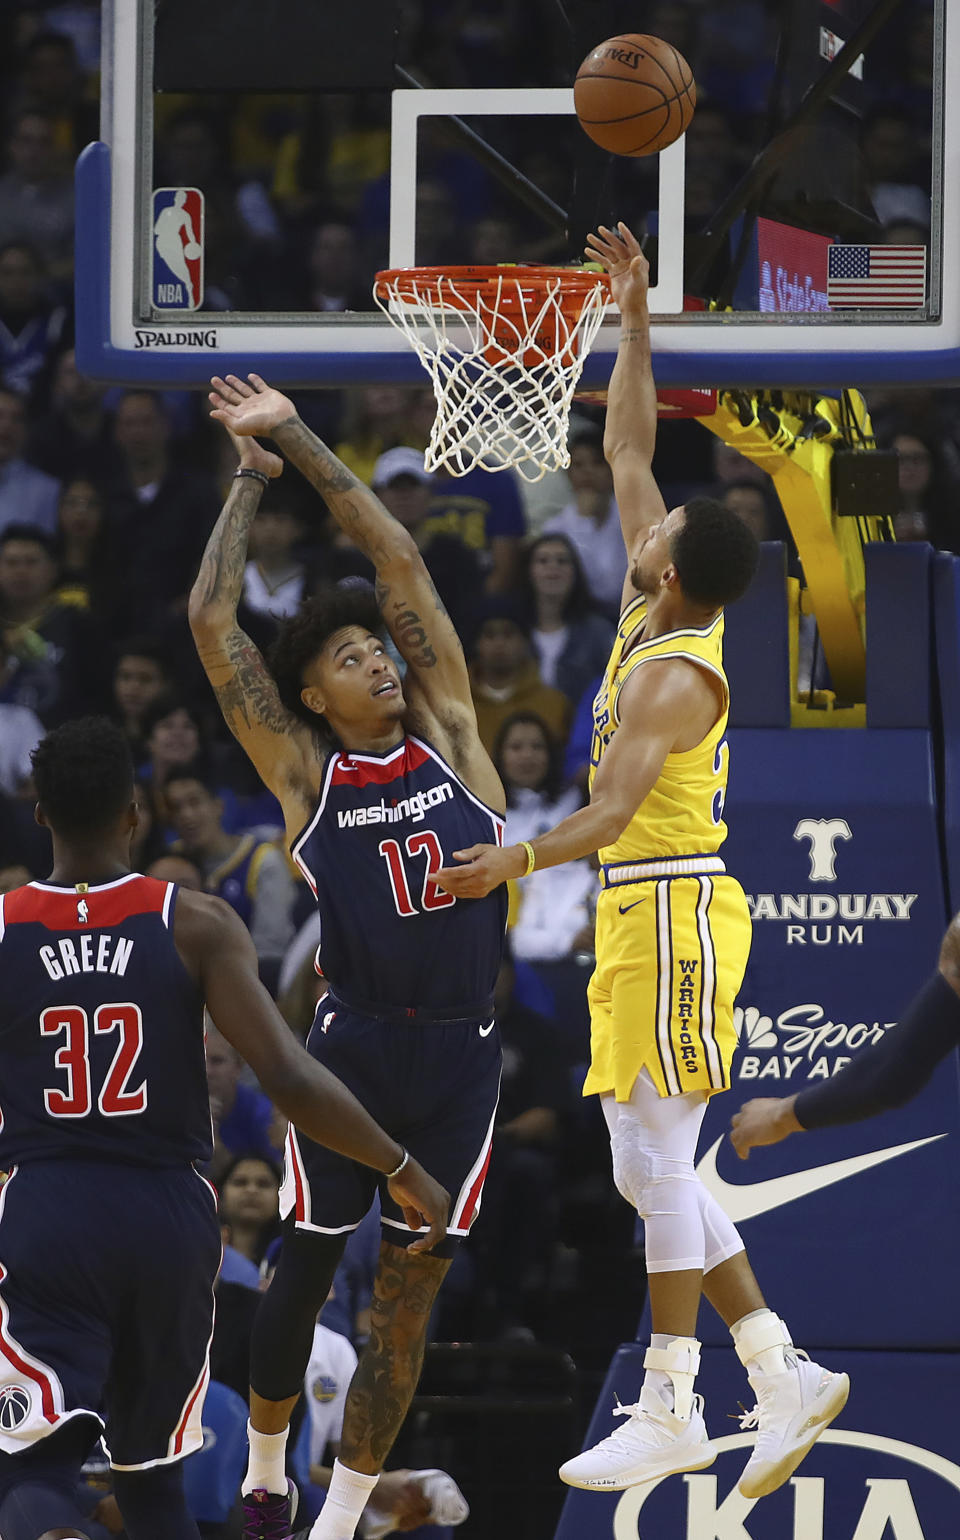 Golden State Warriors' Stephen Curry, right, lays up a shot over Washington Wizards' Kelly Oubre Jr. (12) during the first half of an NBA basketball game Wednesday, Oct. 24, 2018, in Oakland, Calif. (AP Photo/Ben Margot)